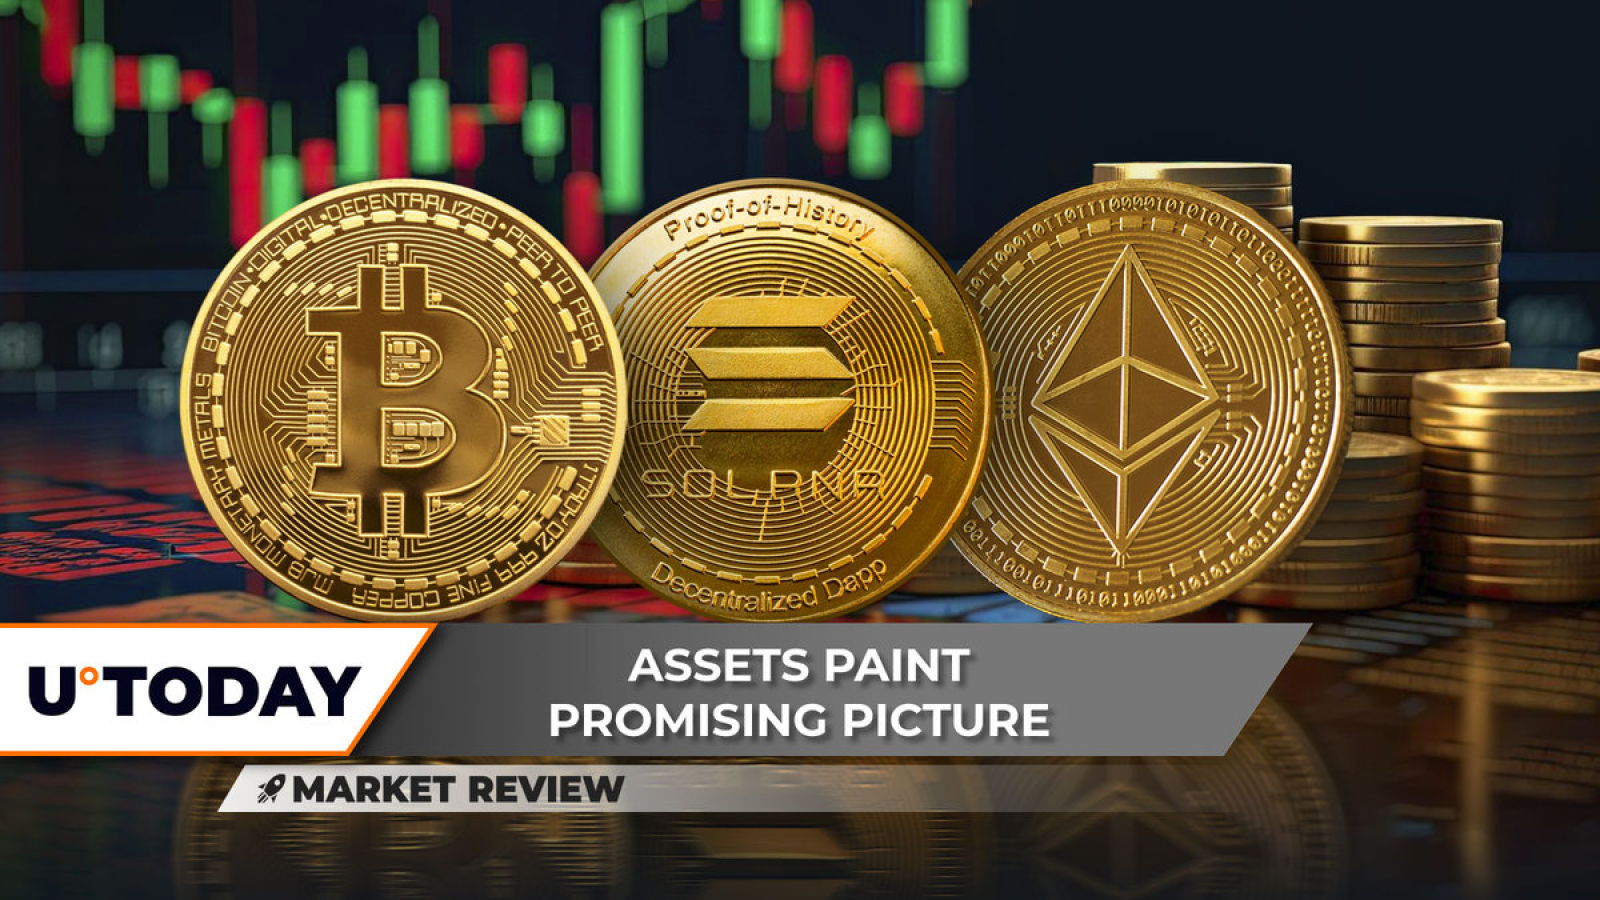 Bitcoin (BTC) to Test ATH Again? Solana (SOL) Surge Isn't Stopping, Ethereum (ETH) Paints Symmetrical Triangle Pattern